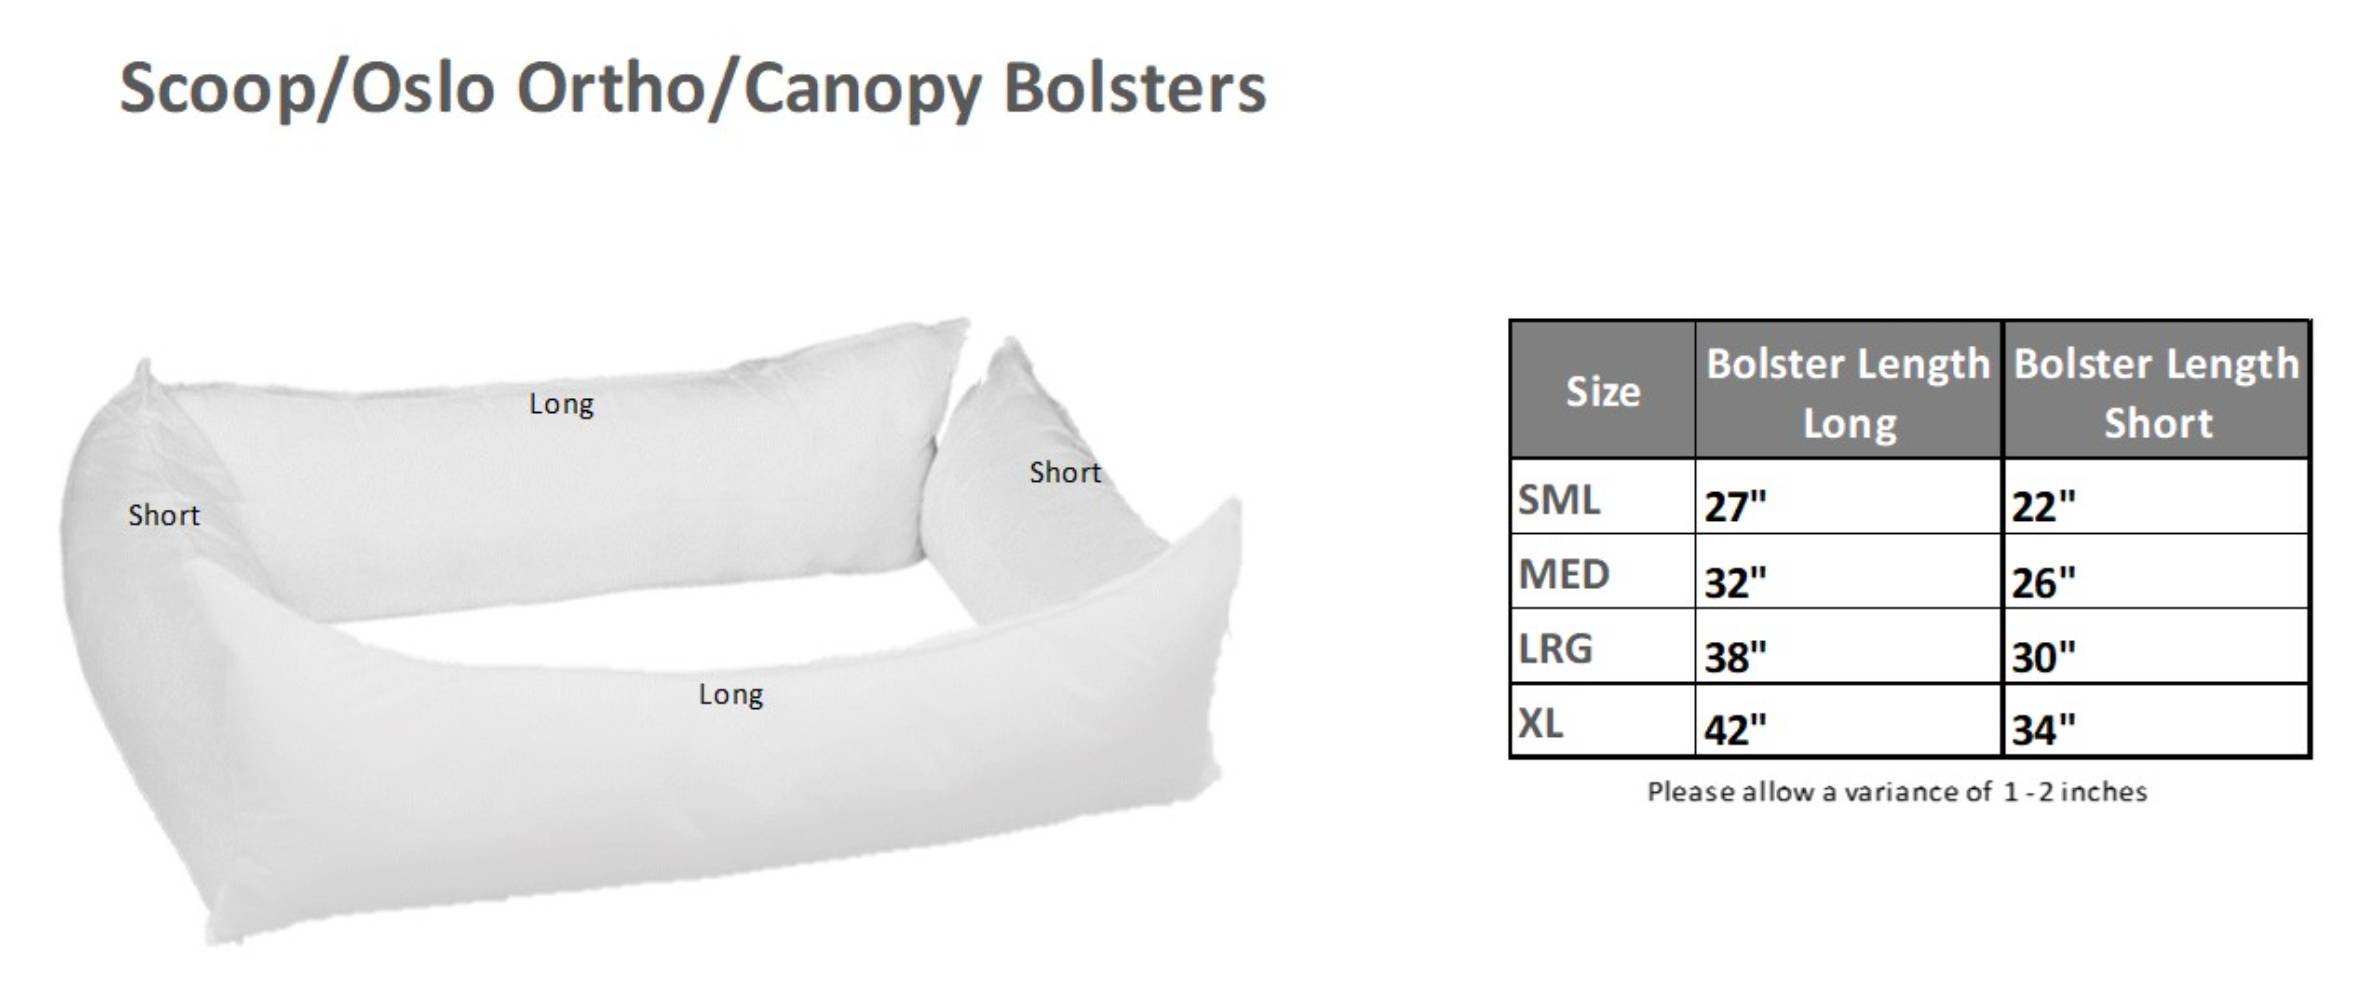 Bowsers The Oslo Ortho, Scoop, Canopy Inner Bolsters Size Guide